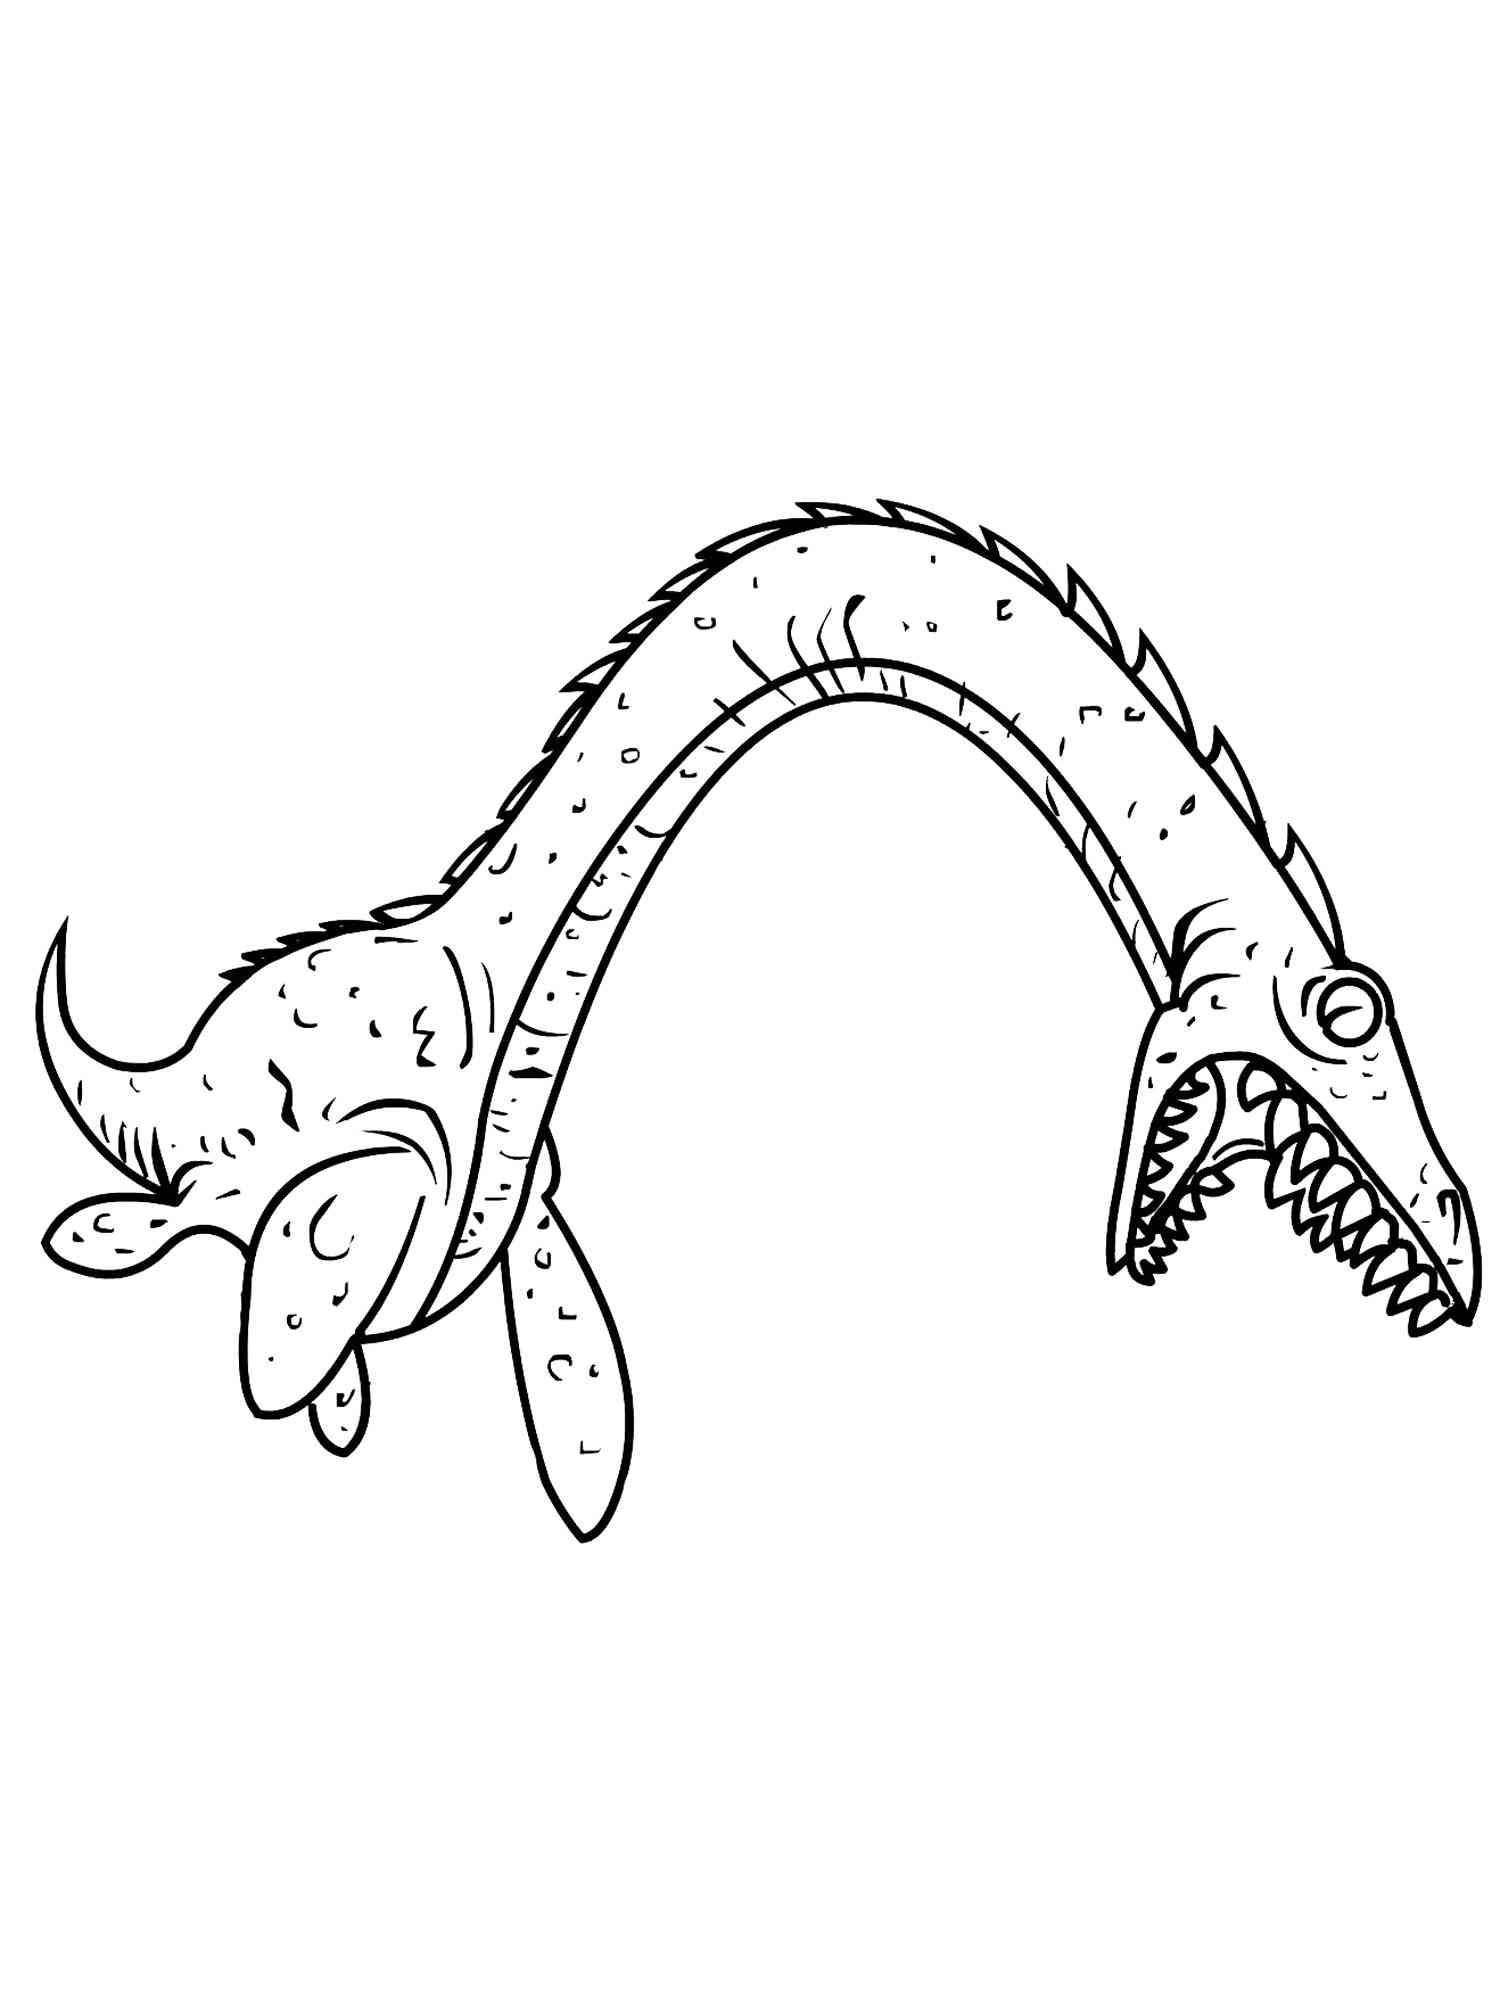 Angry Plesiosaurus coloring page